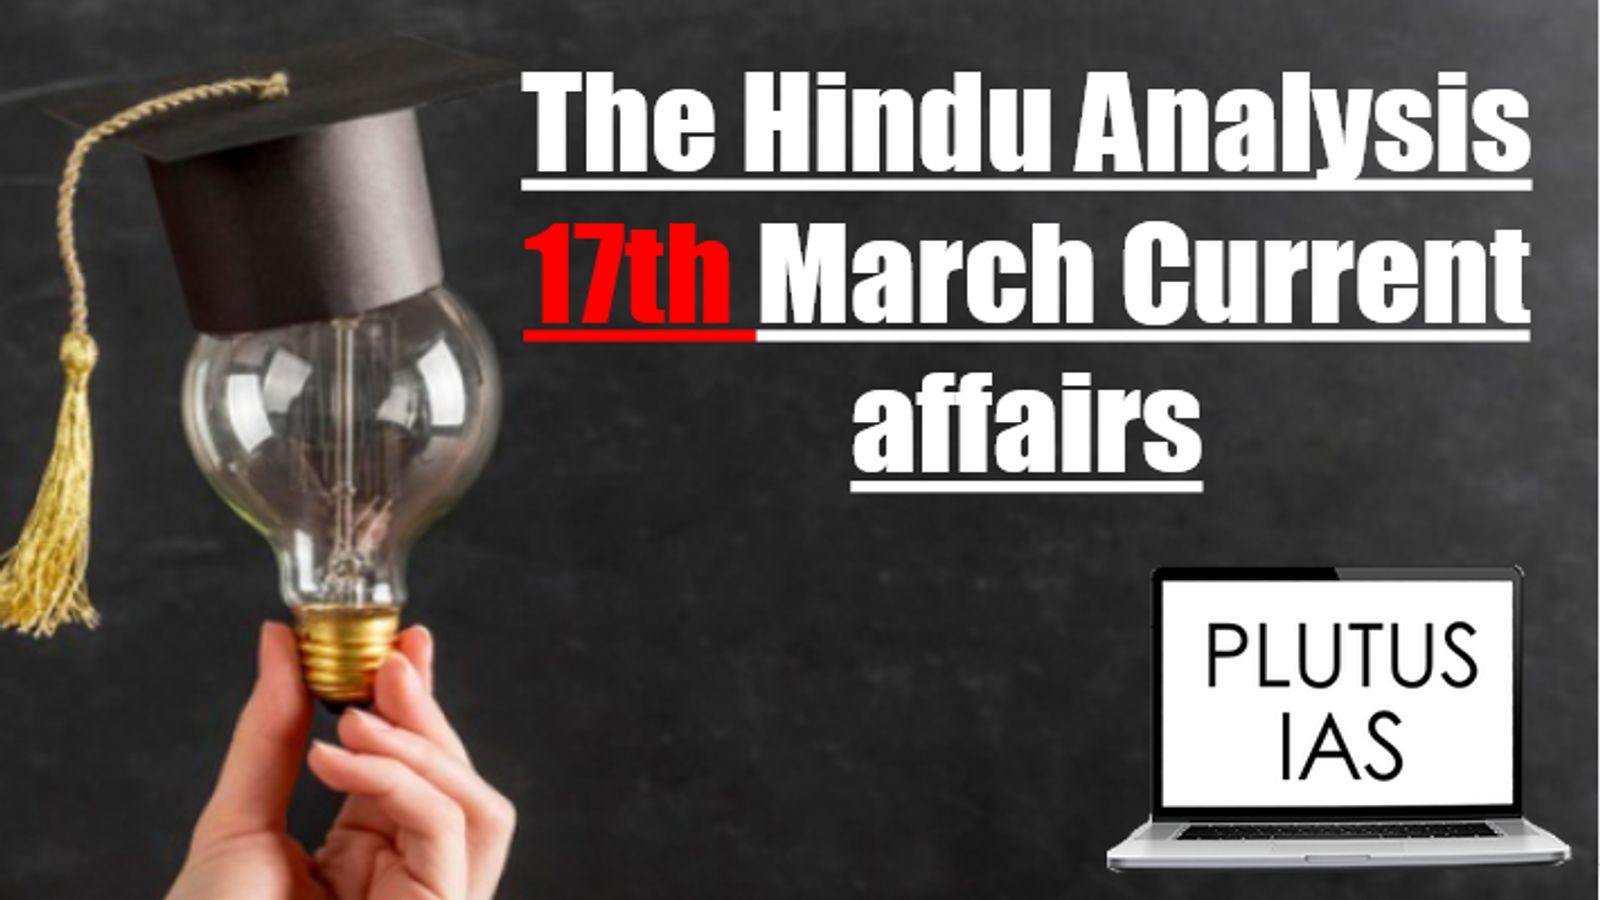 The Hindu Analysis 17th March Current Affairs